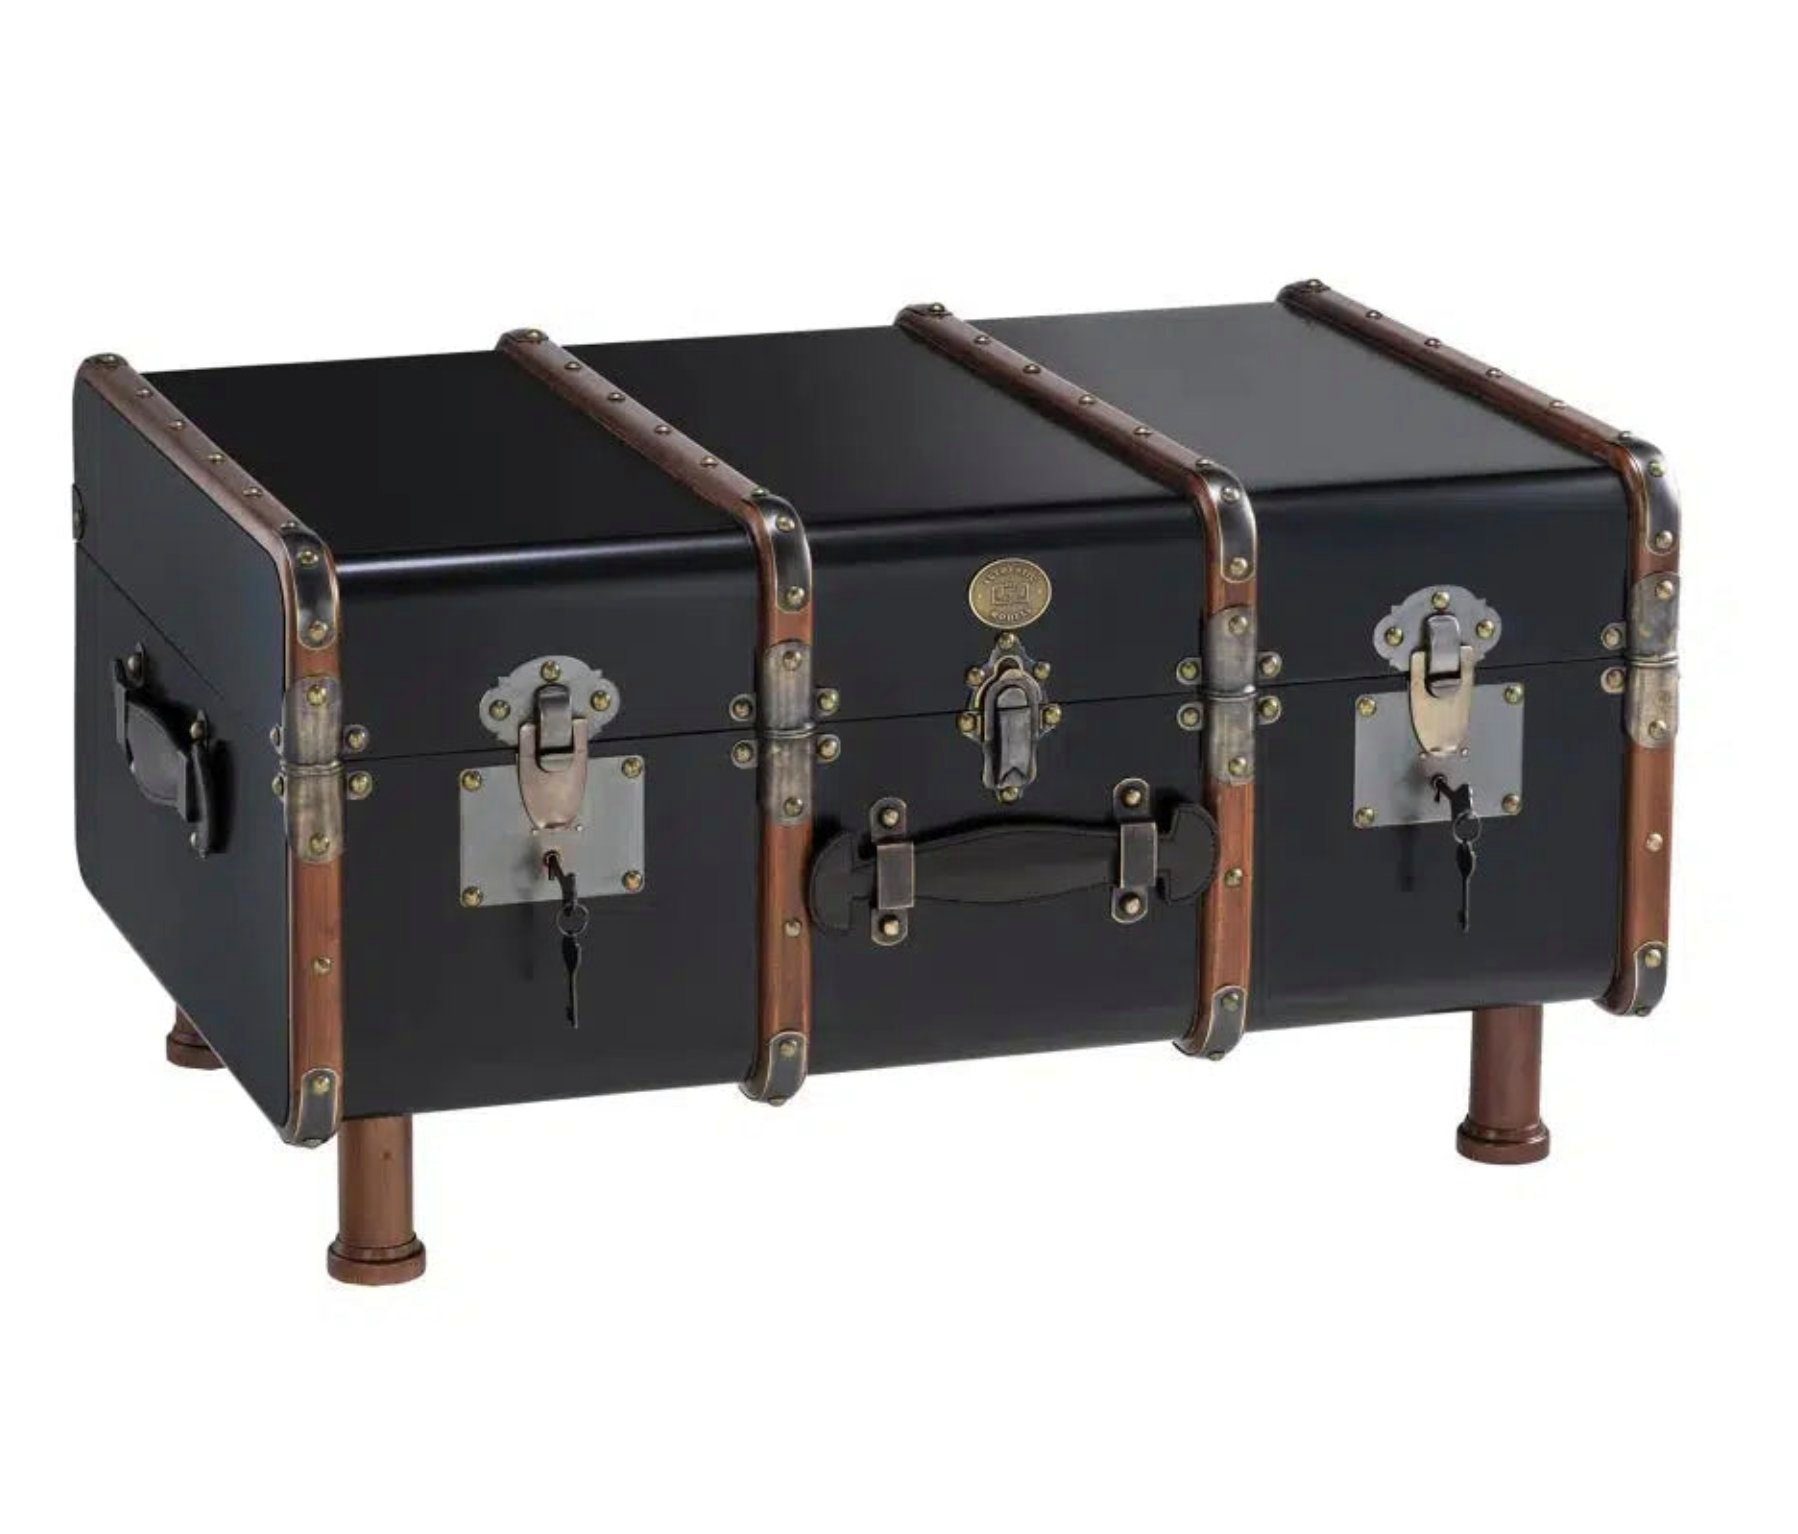 Black Couchtisch Trunk Truhe Table Stateroom AUTHENTIC MODELS